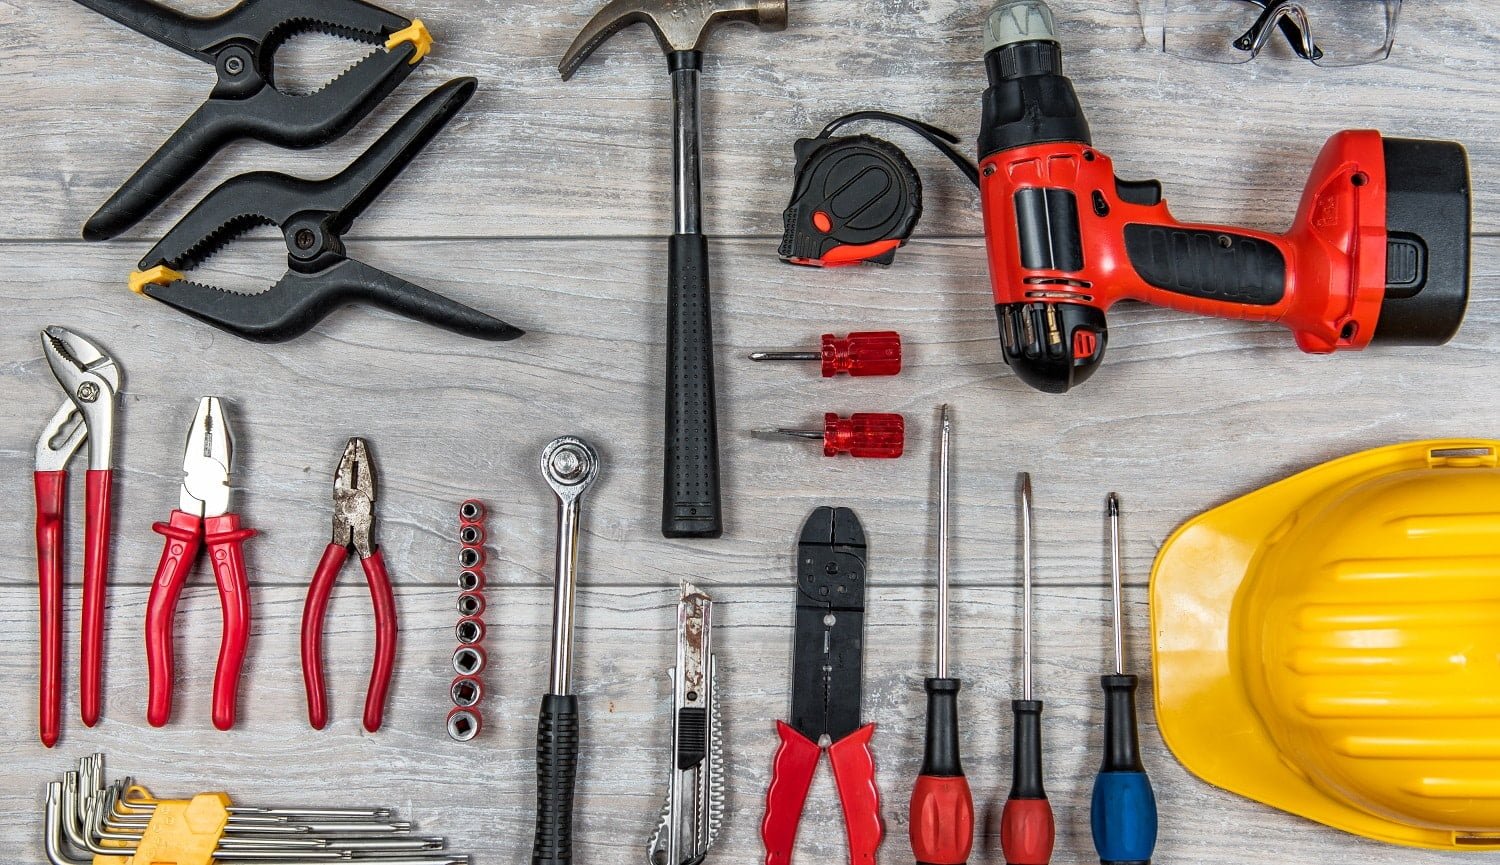 Various construction, DIY hand tools lies in knolling organization on a rustic wooden table, desk or workbench.